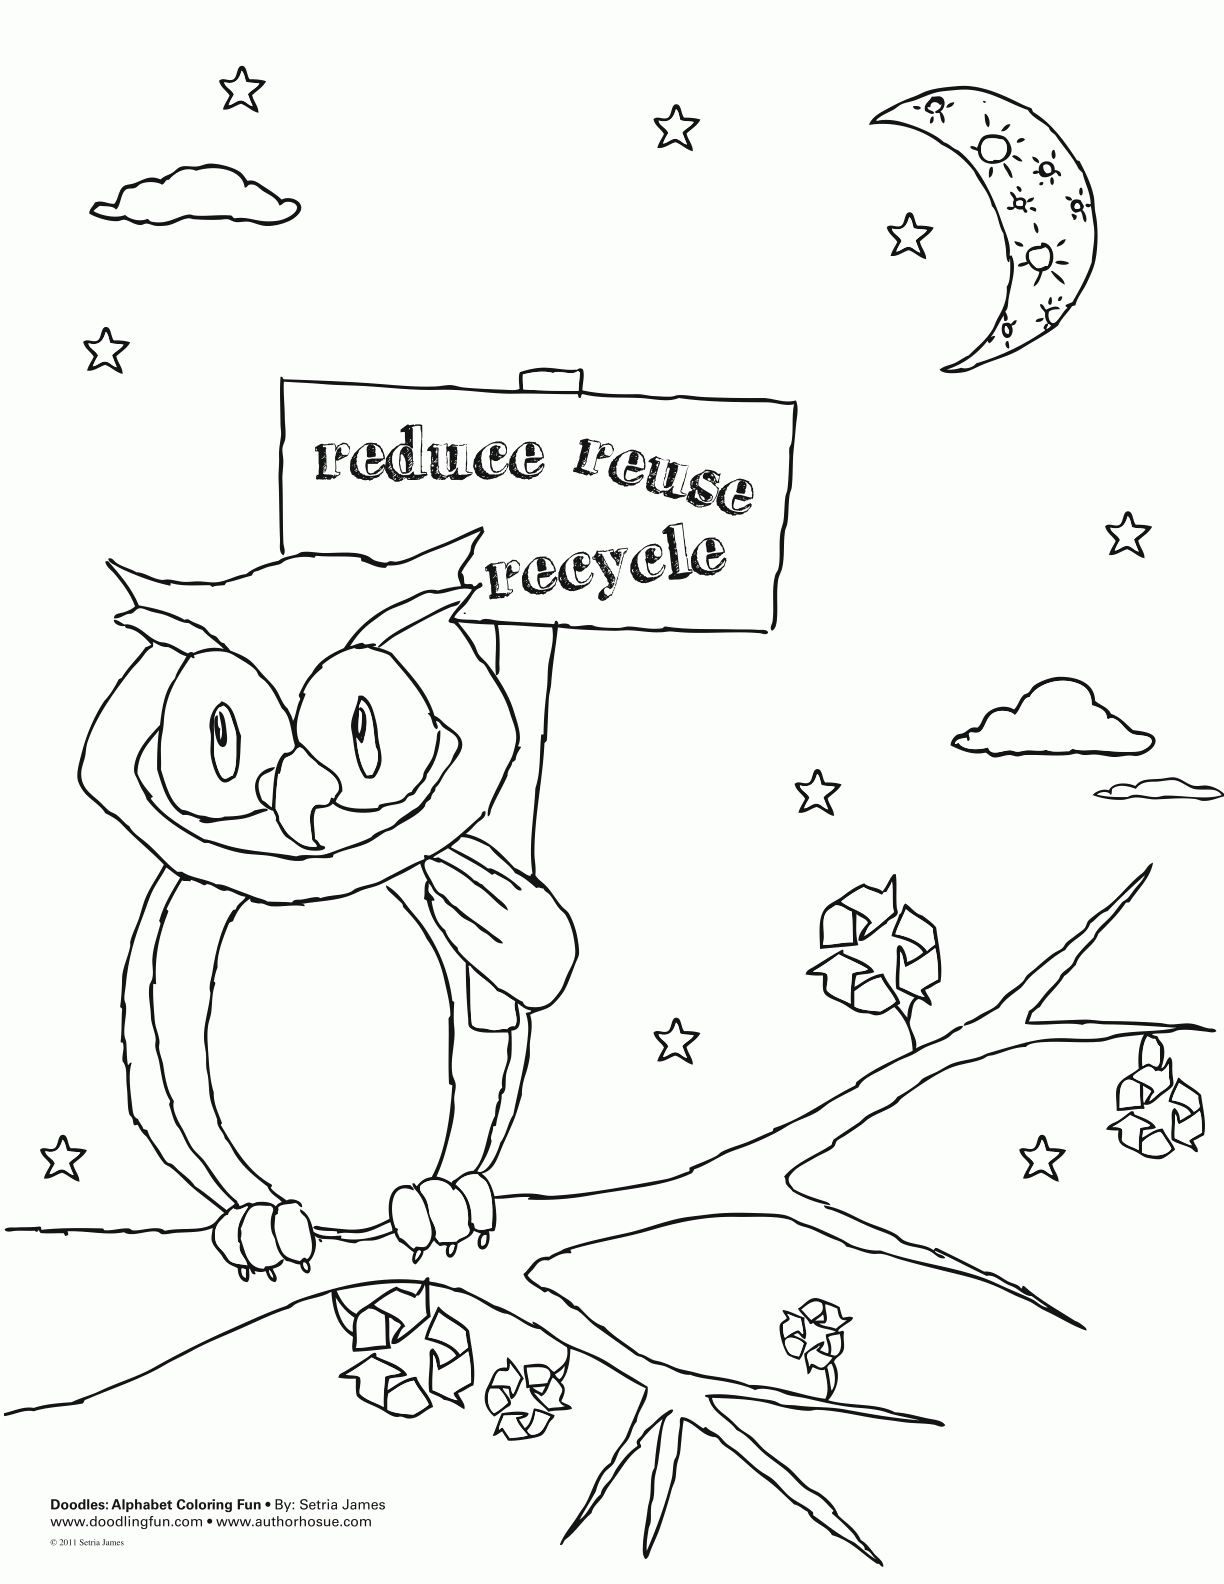 Recycling Coloring Page 28 Images Recycle Pages Home